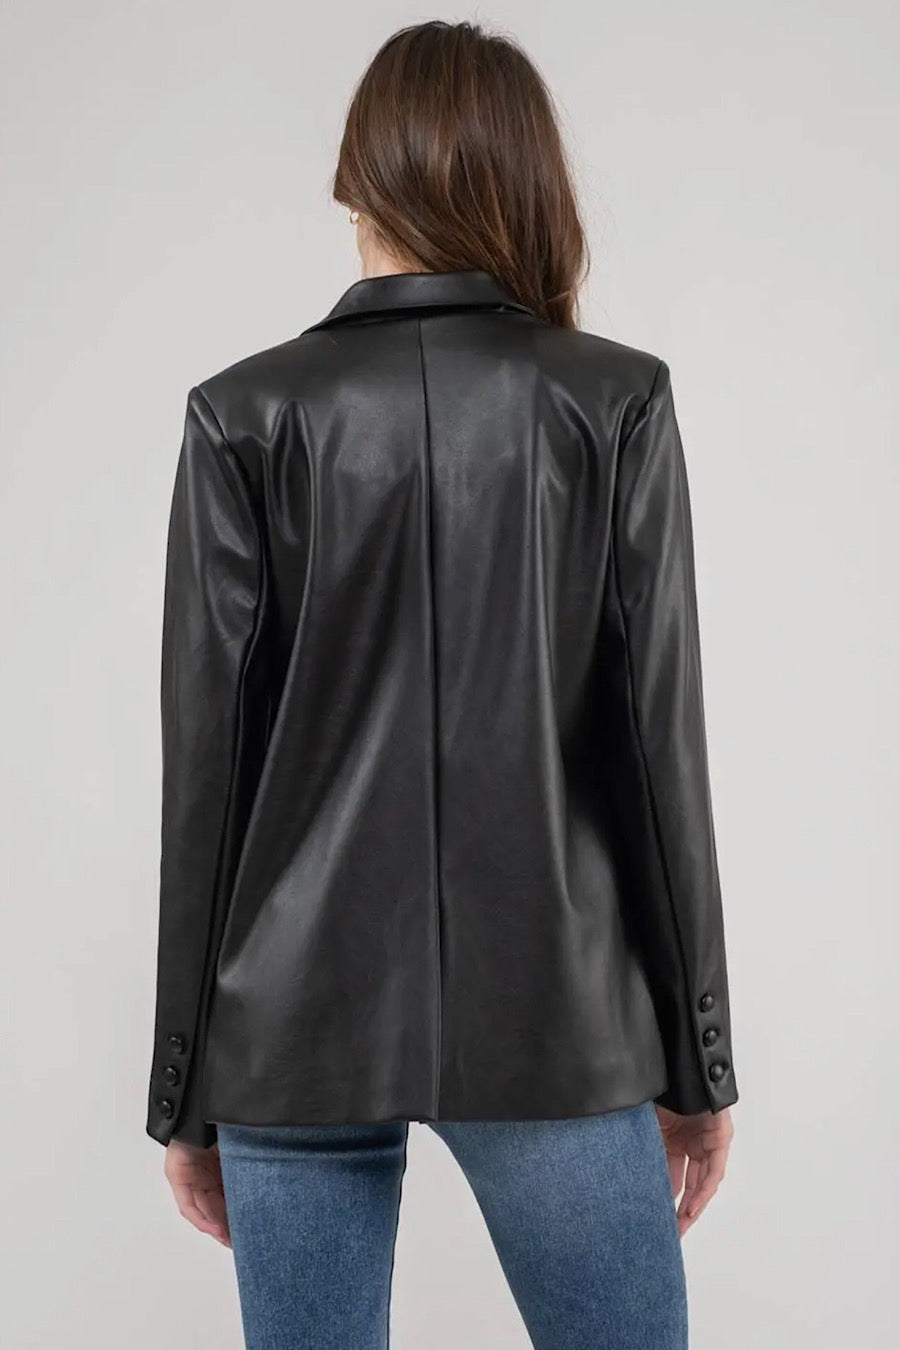 Mad About It Leather Blazer